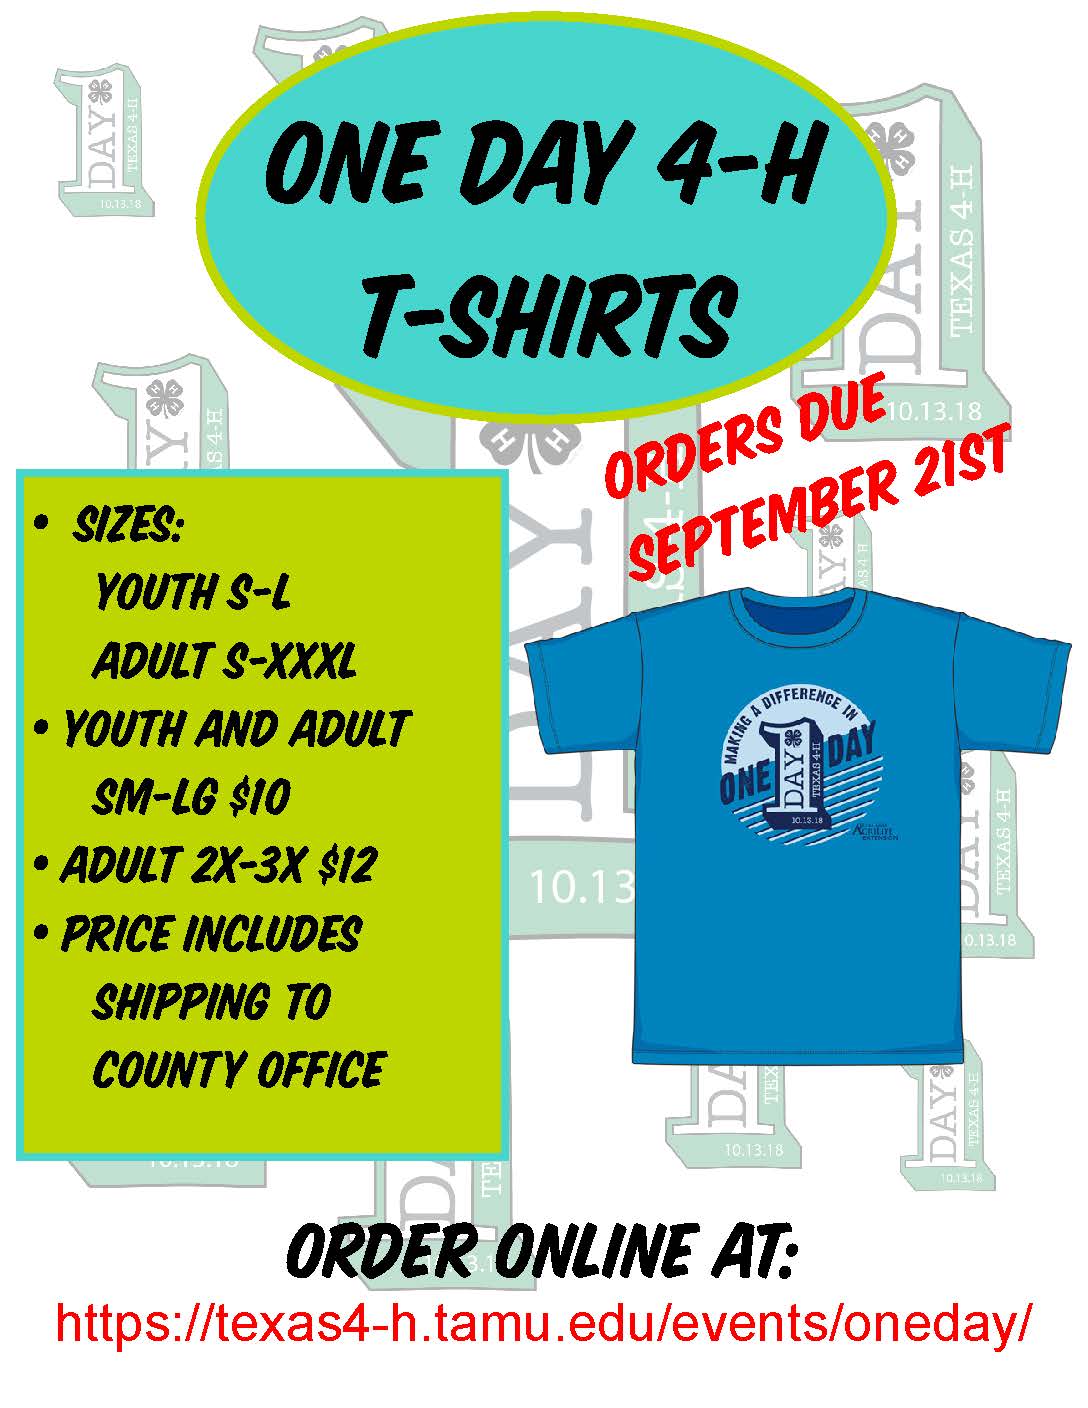 Texas 4-H Practitioner's Blog: Last Day to Order One-Day 4-H Shirts